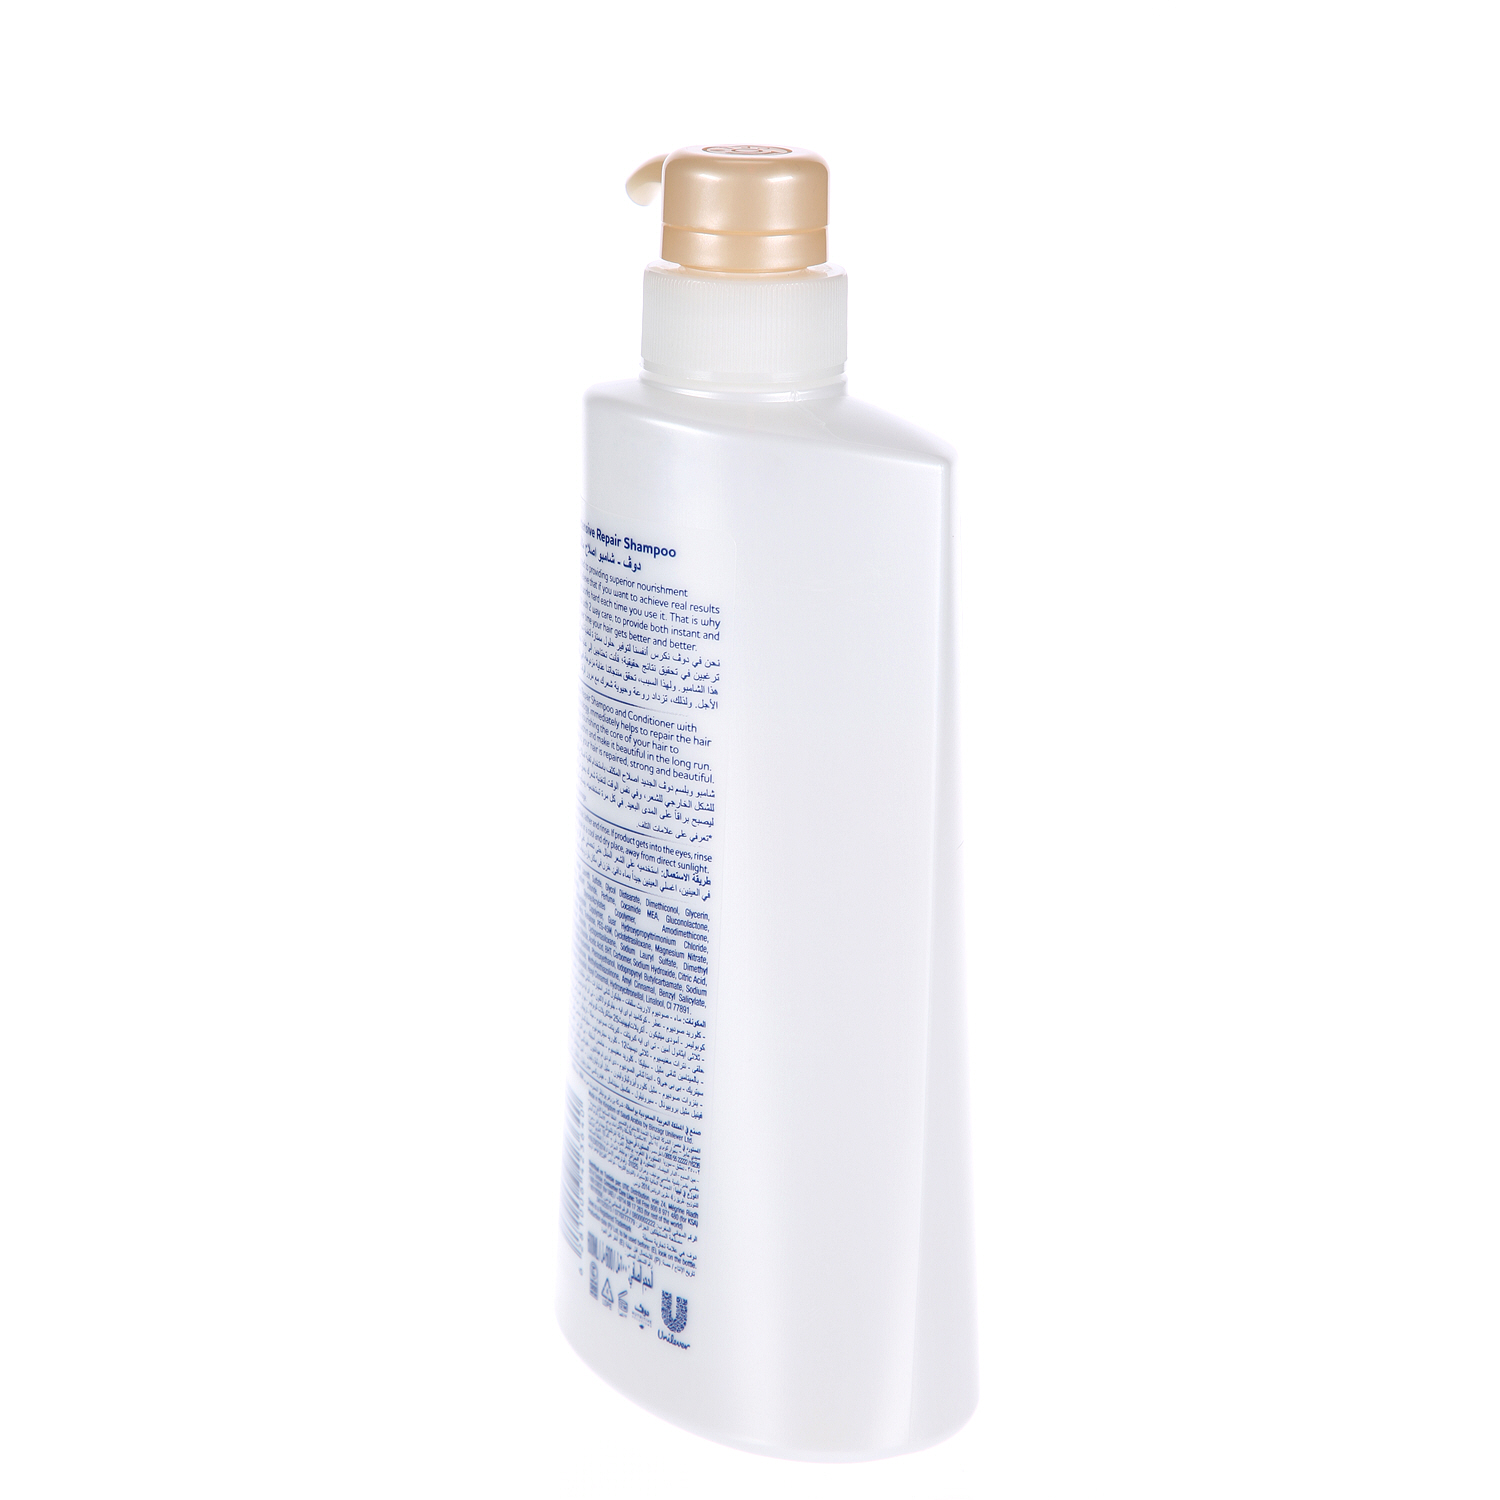 Dove Shampoo for Damaged Hair Intensive Repair Nourishing Care for up to 100% Healthy Looking Hair 600 ml